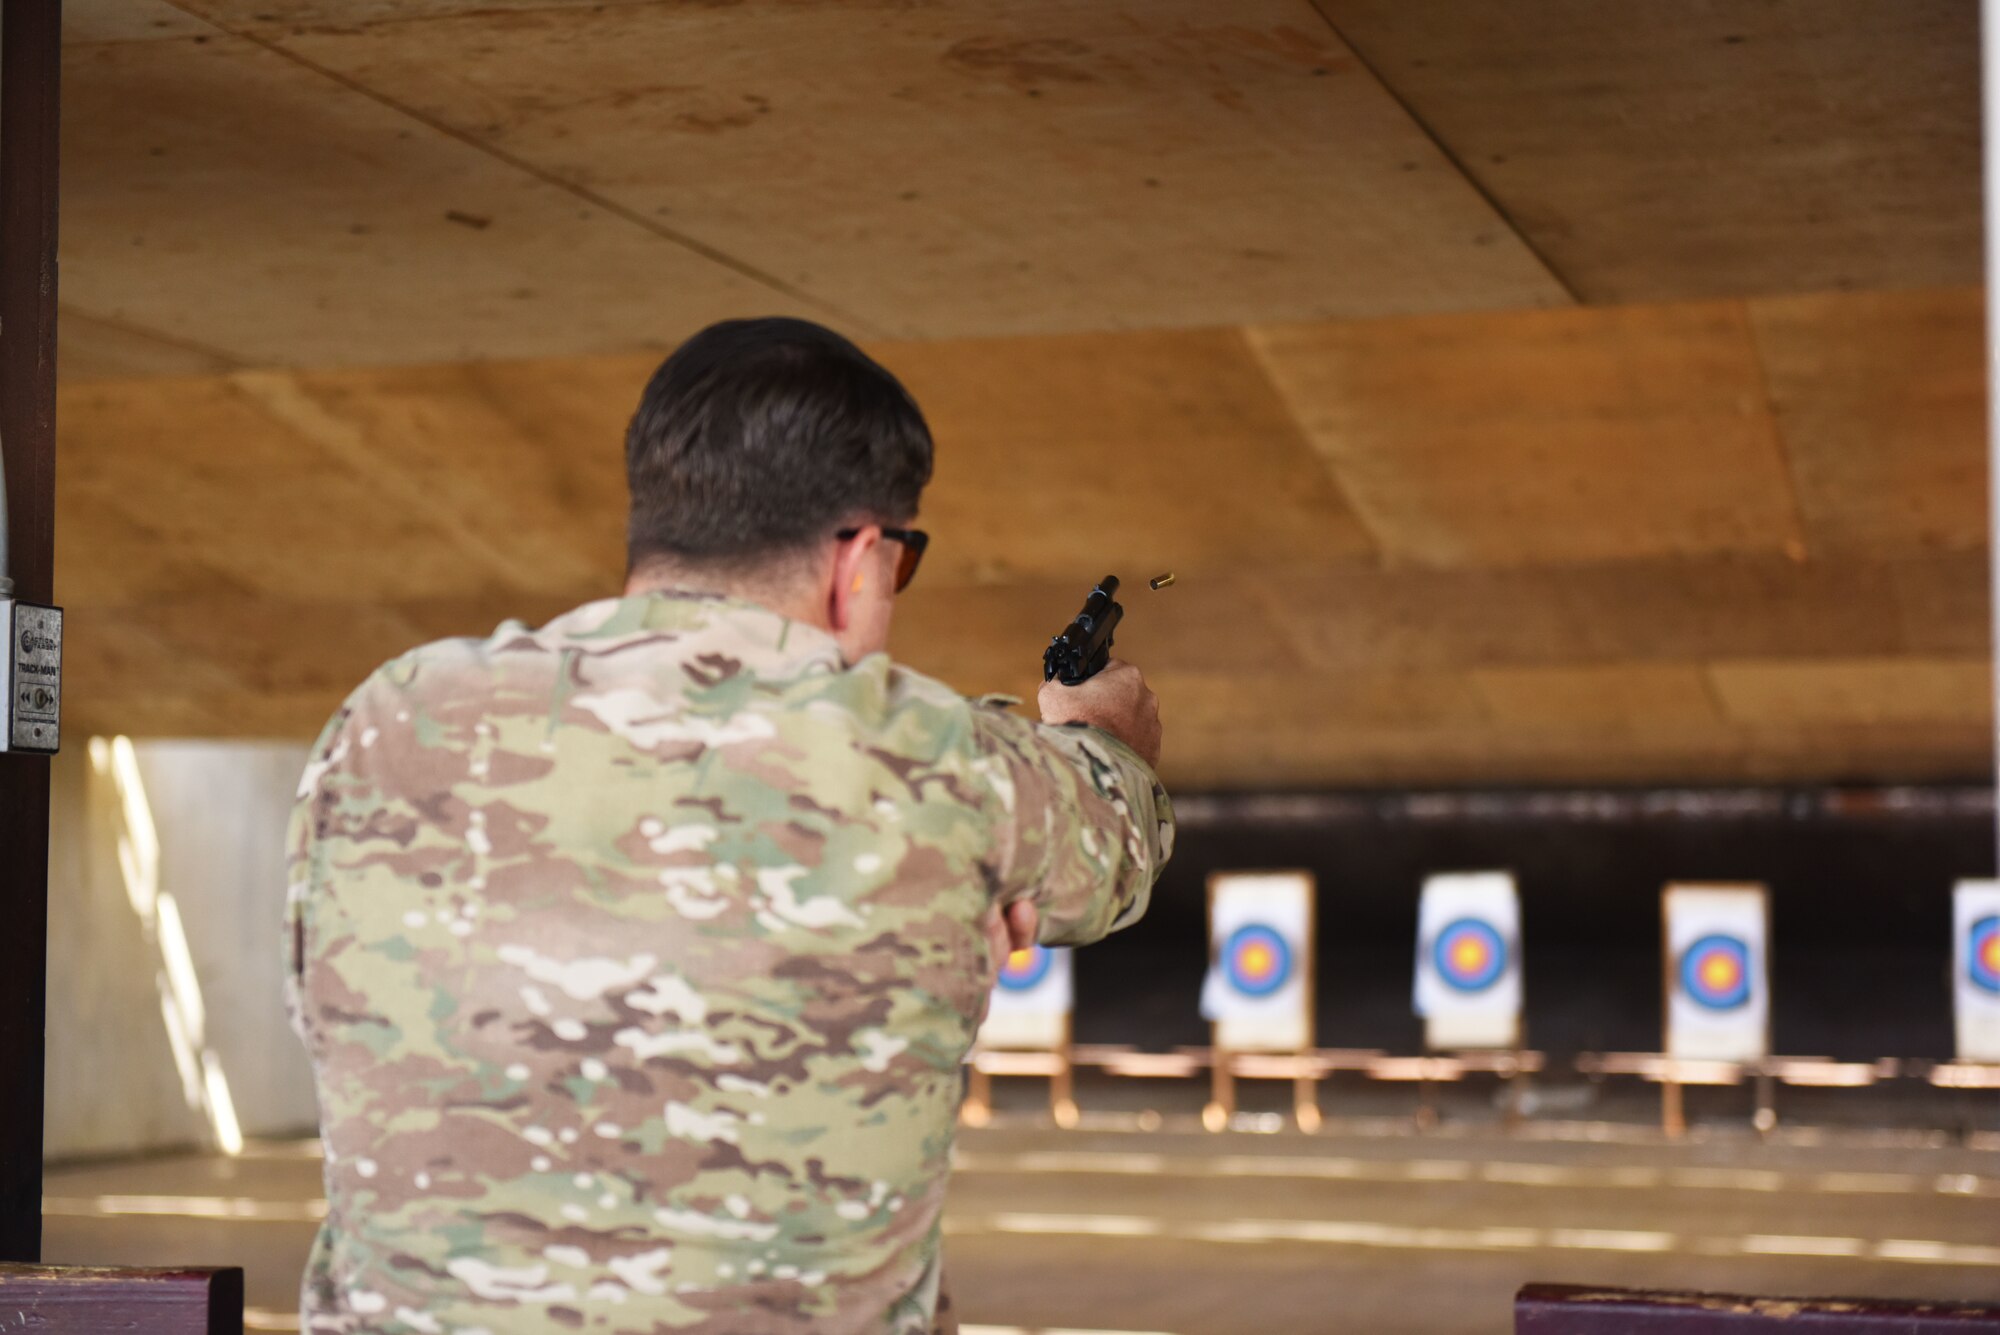 U.S. Air Force Tech. Sgt. Andrew Brown, an Excellent in Competition participant, fires at his target Oct. 28, 2019, at Incirlik Air Base, Turkey. The 39th Security Forces Squadron hosted the competition, which was open to U.S. service members across Incirlik. (U.S. Air Force photo by Staff Sgt. Joshua Magbanua)